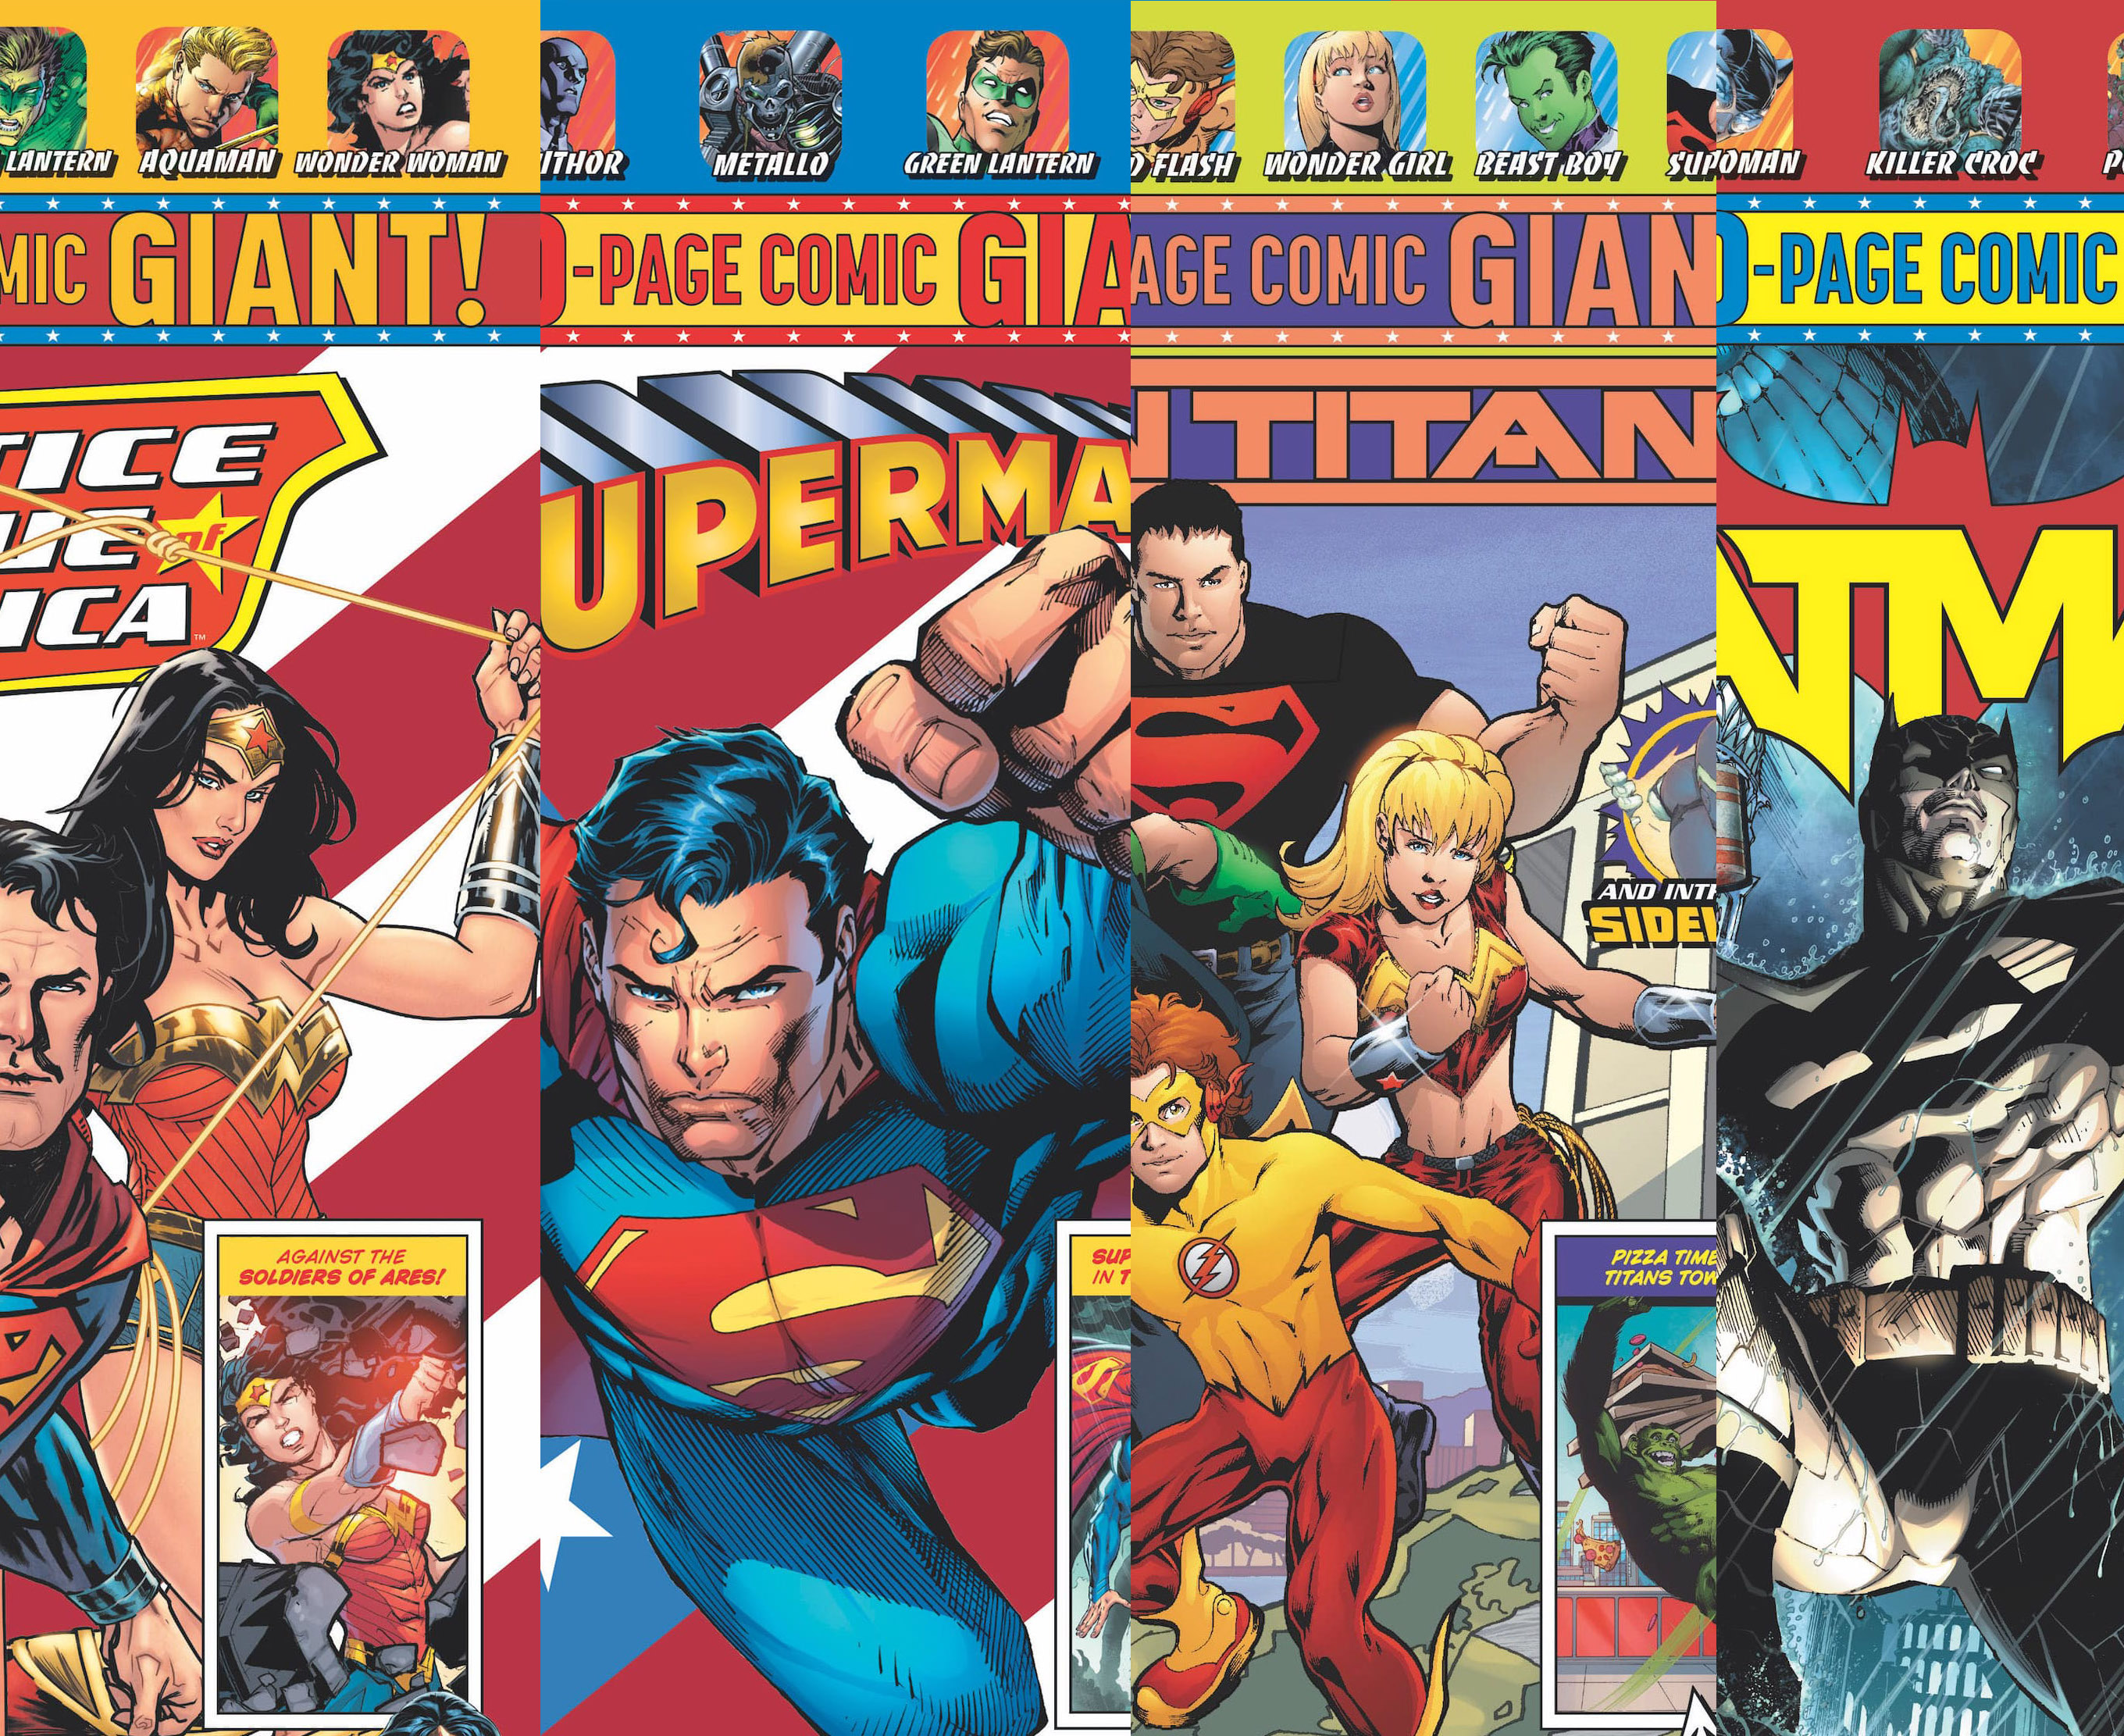 Exclusive 100-page DC Comics to be sold monthly at Walmart this summer